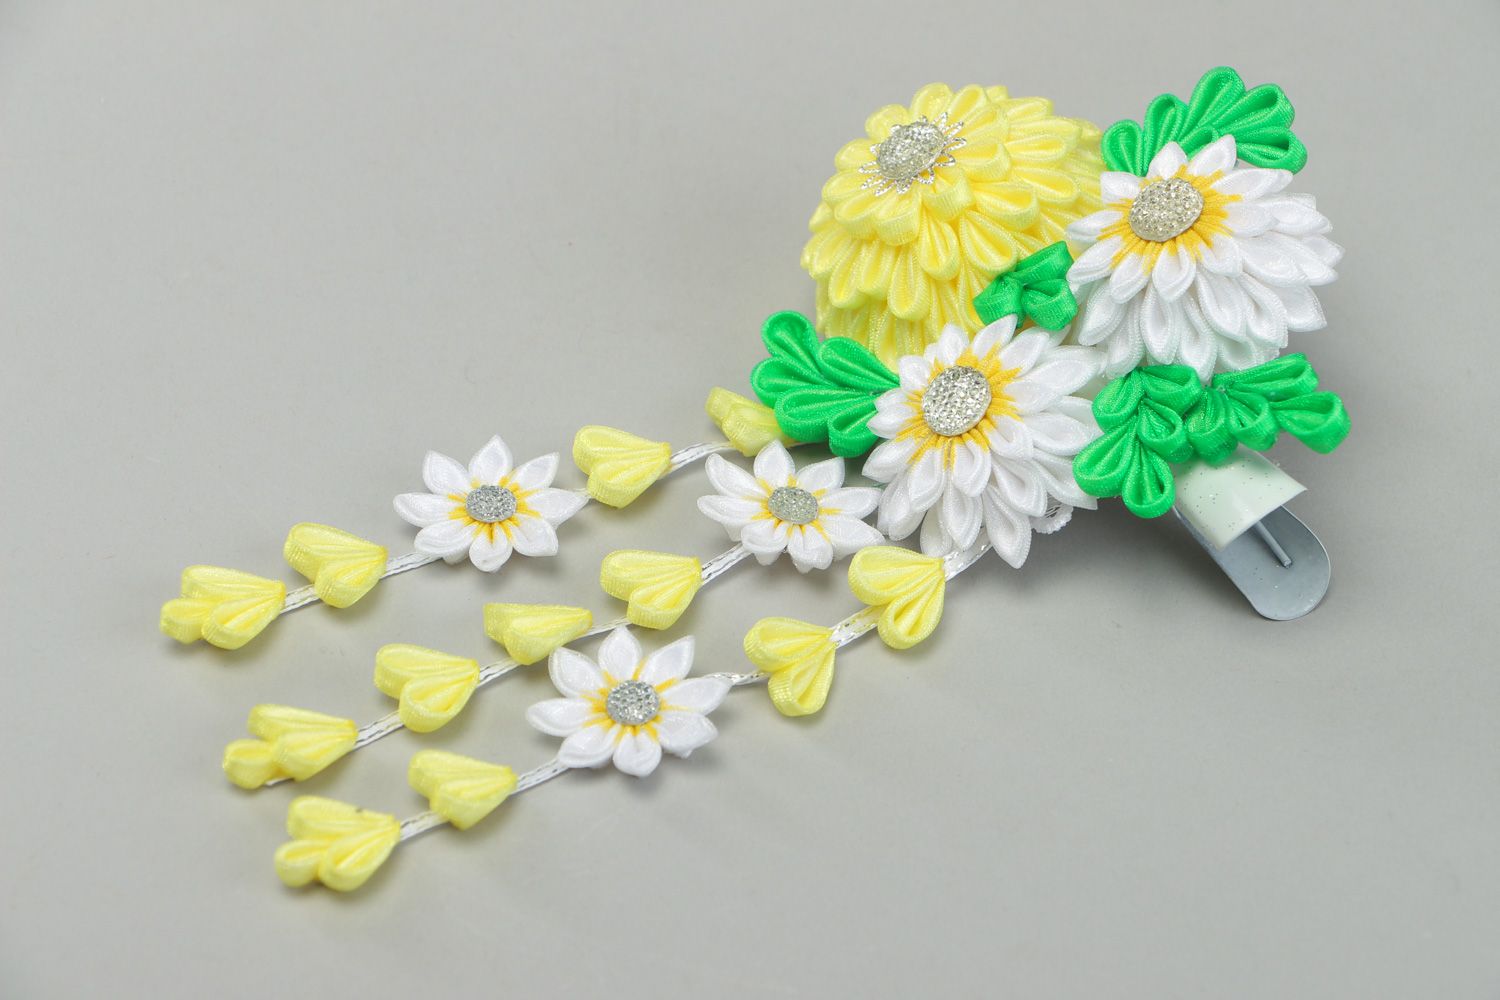 Kanzashi hair clip hand made of satin ribbons in green yellow and white colors photo 1